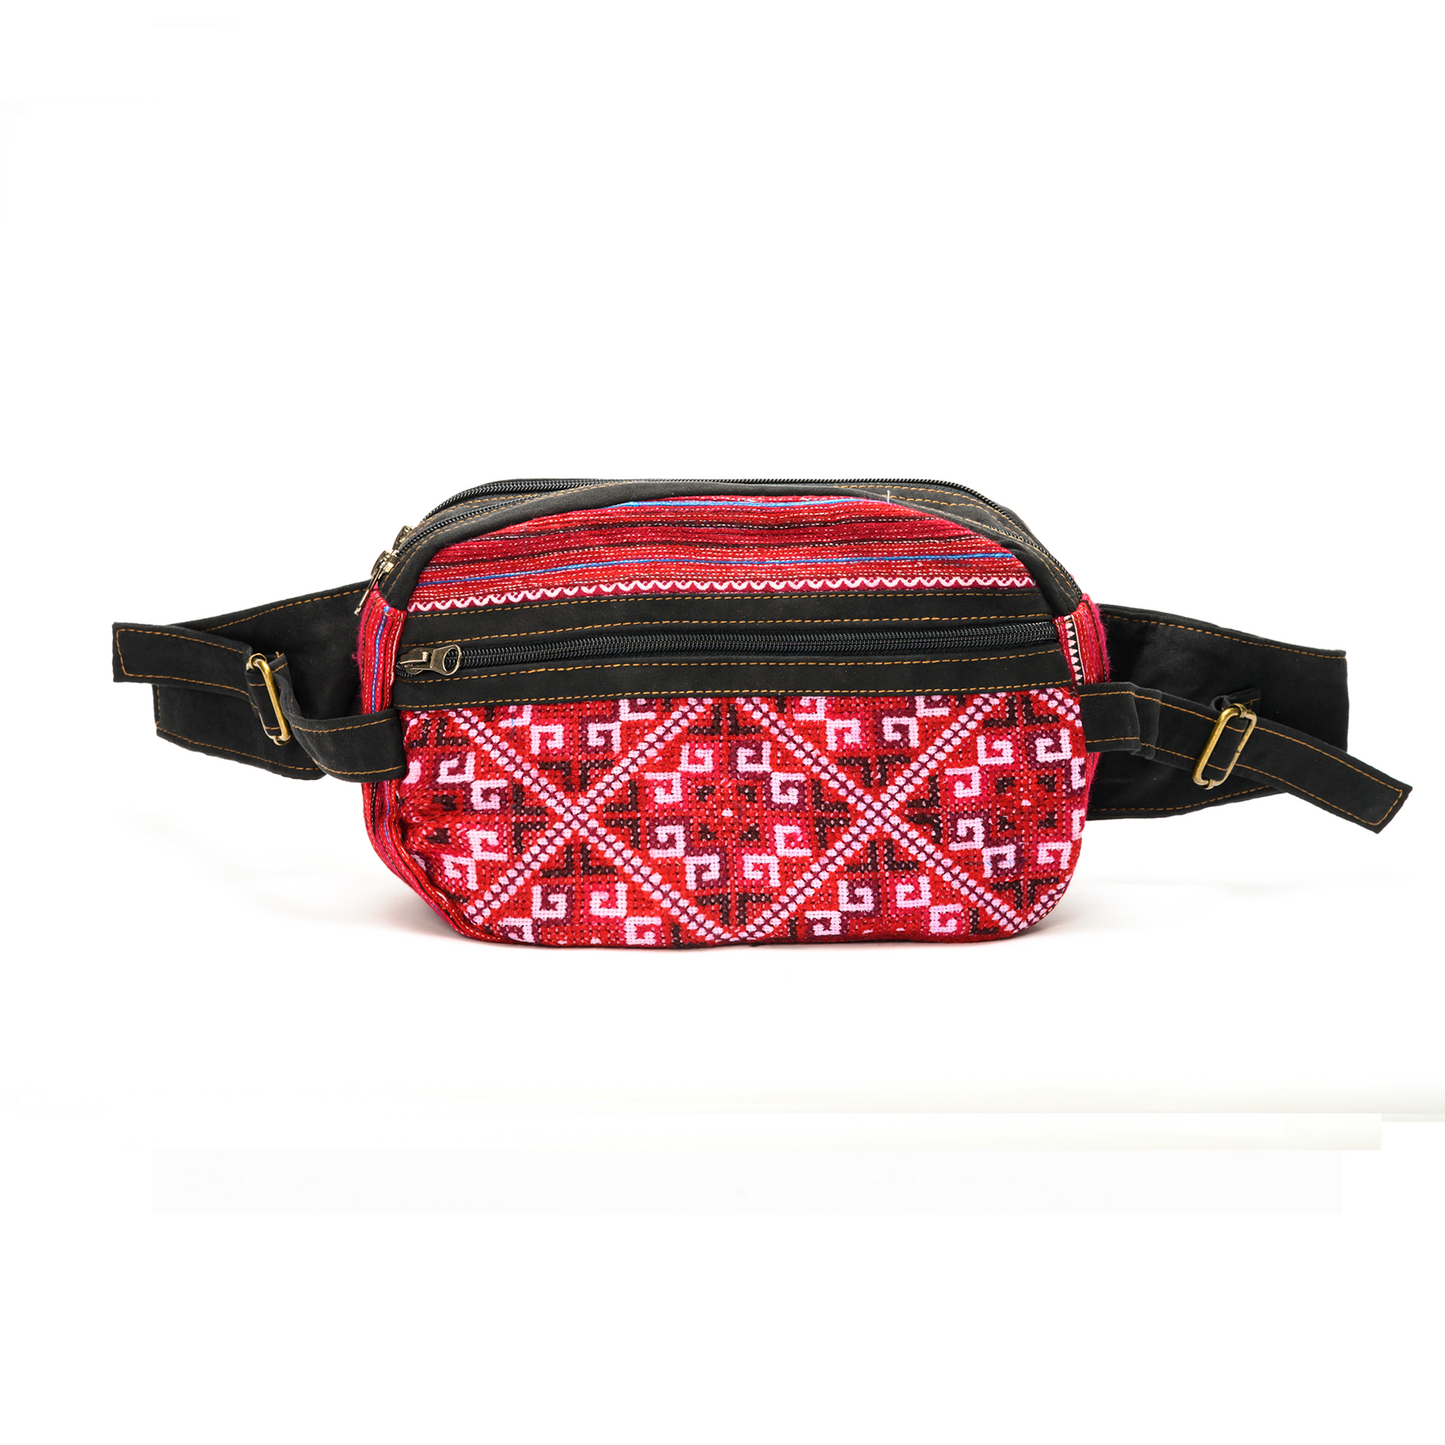 Pink Waist bag, embroidery and faux leather